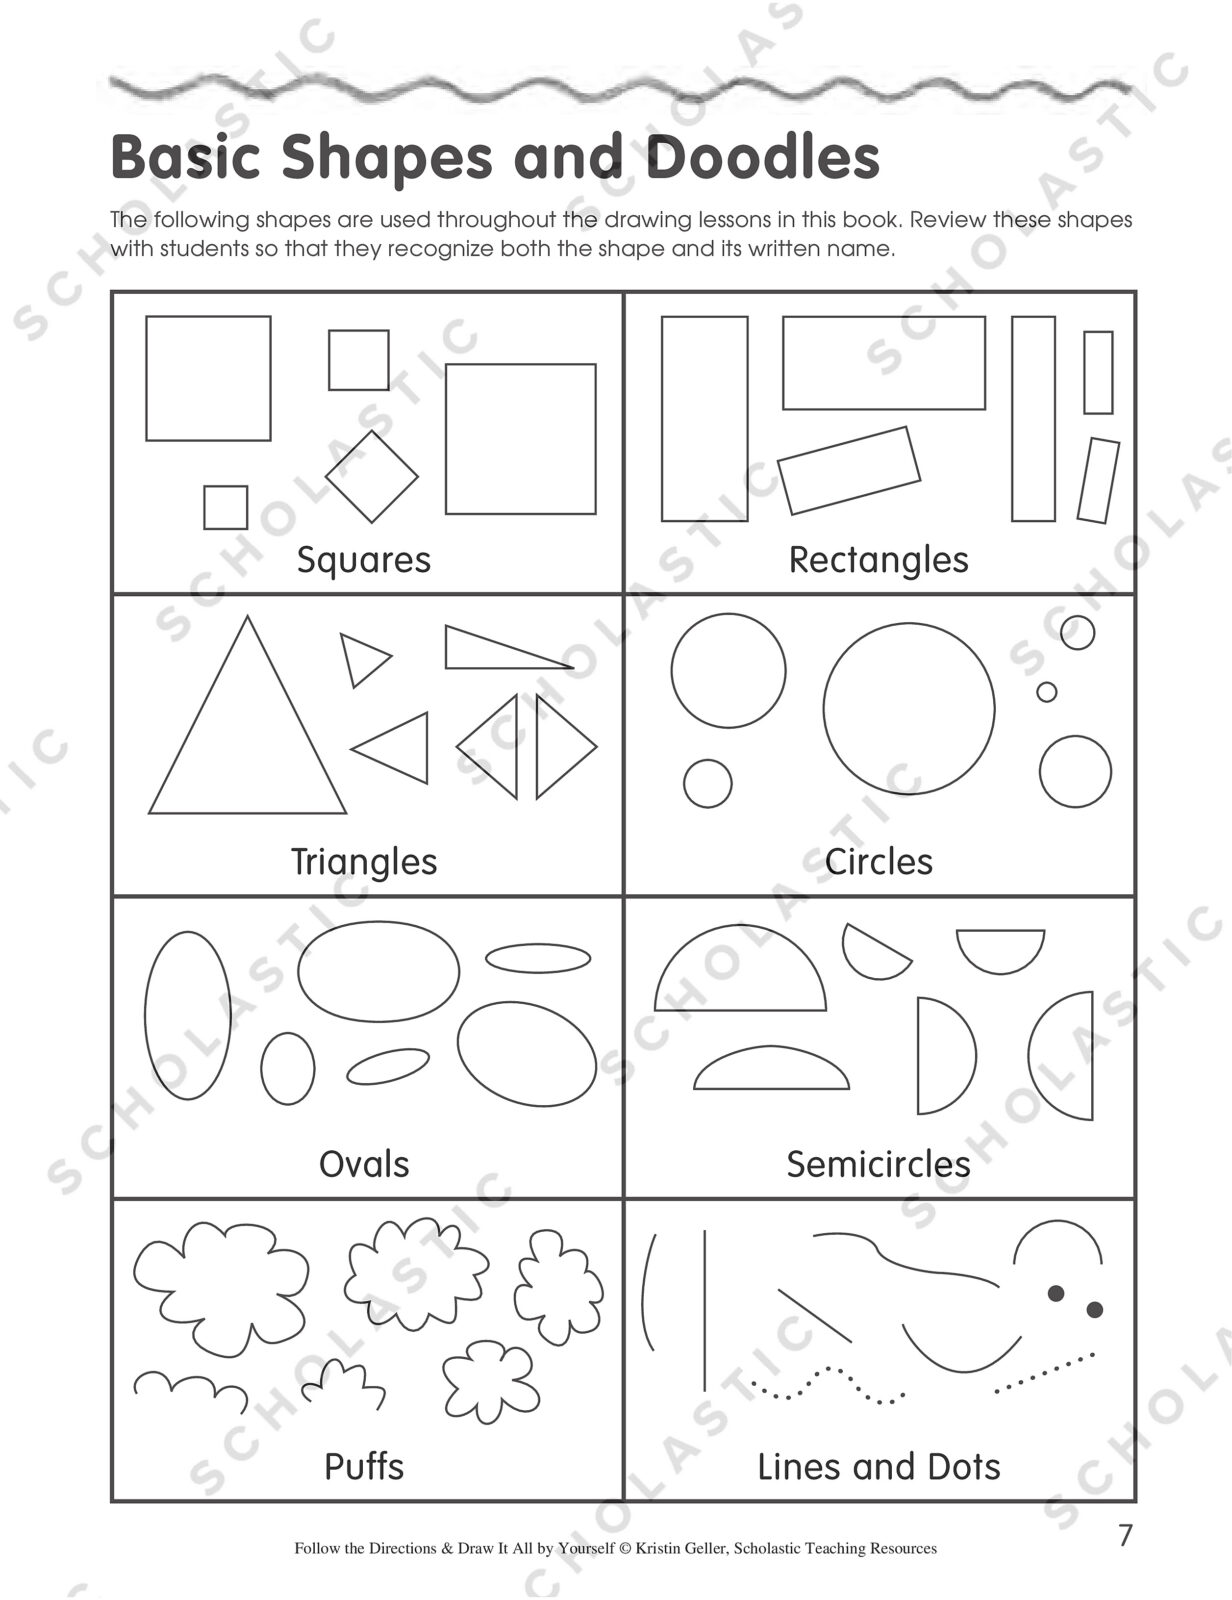 Follow the Directions & Draw It All by Yourself!: 25 Reproducible Lessons  That Guide Kids to Draw Adorable Pictures